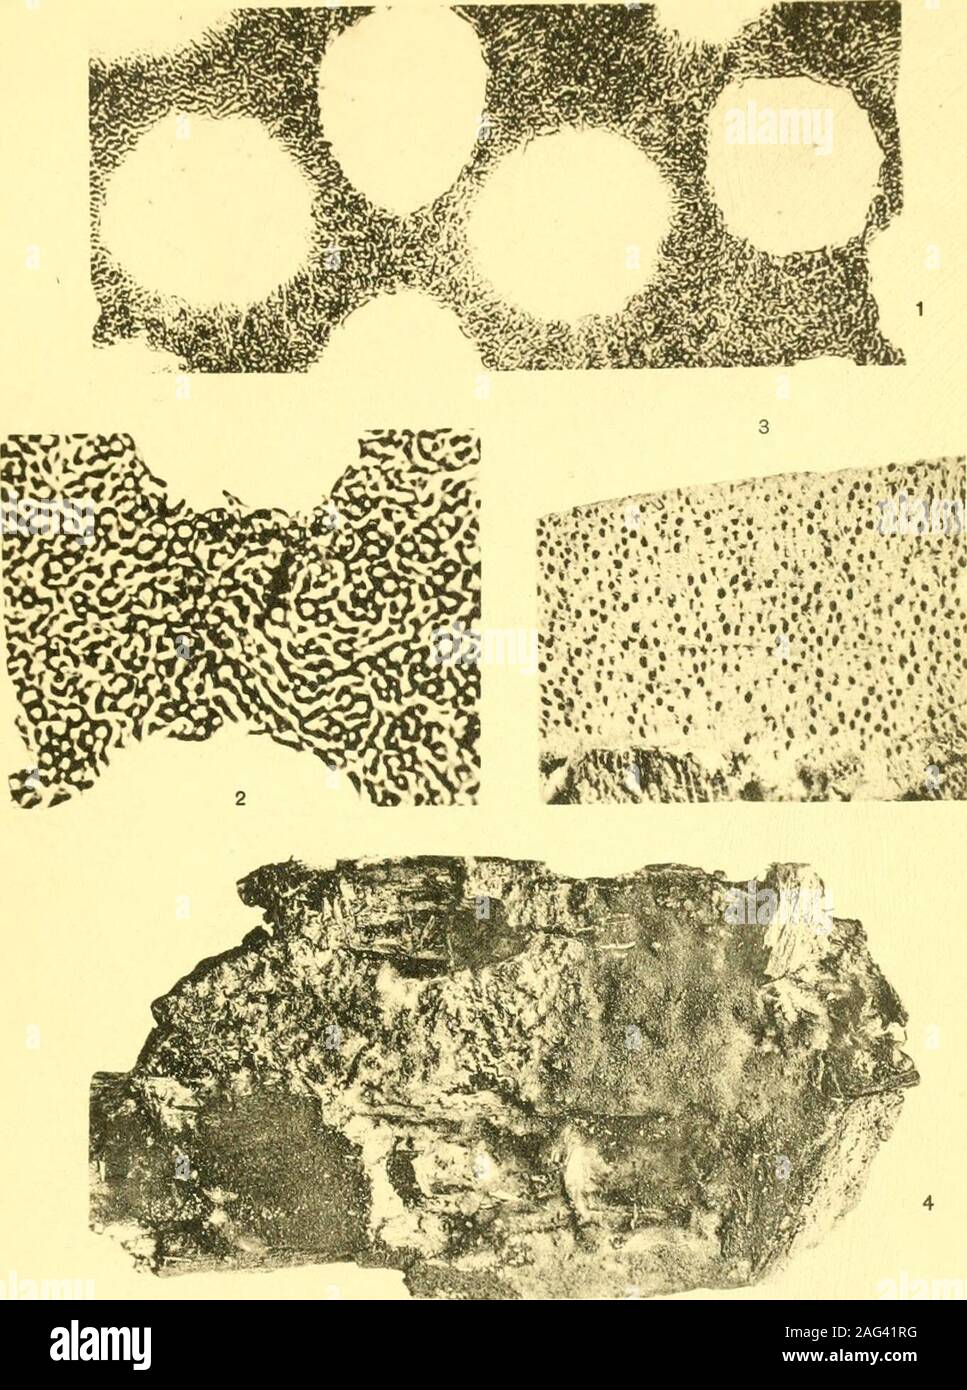 . Report of the State Entomologist on injurious and other insects of the state of New York. Fig. 1-5 PORIA GRISEOALBA (Peck) Sacc.Fig. 6-7 POLYPORUS INDURATUS Peck Plate 7 Polyporus induratus Peck 1 Cross section of the hymenium from specimens in the type col- lection. X 160. 2 Small portion of the trama as seen in cross section and enlarged. X 320. 3 Enlarged lateral view of a vertical section through one of the specimens in the type collection. Made with Bausch and LombMicro-Tessar lens, x 10. Poria laetifica (Peck) Sacc. 4 Specimen from the herbarium of L. O. Overholts, no. 3431. 5 Hyphae f Stock Photo